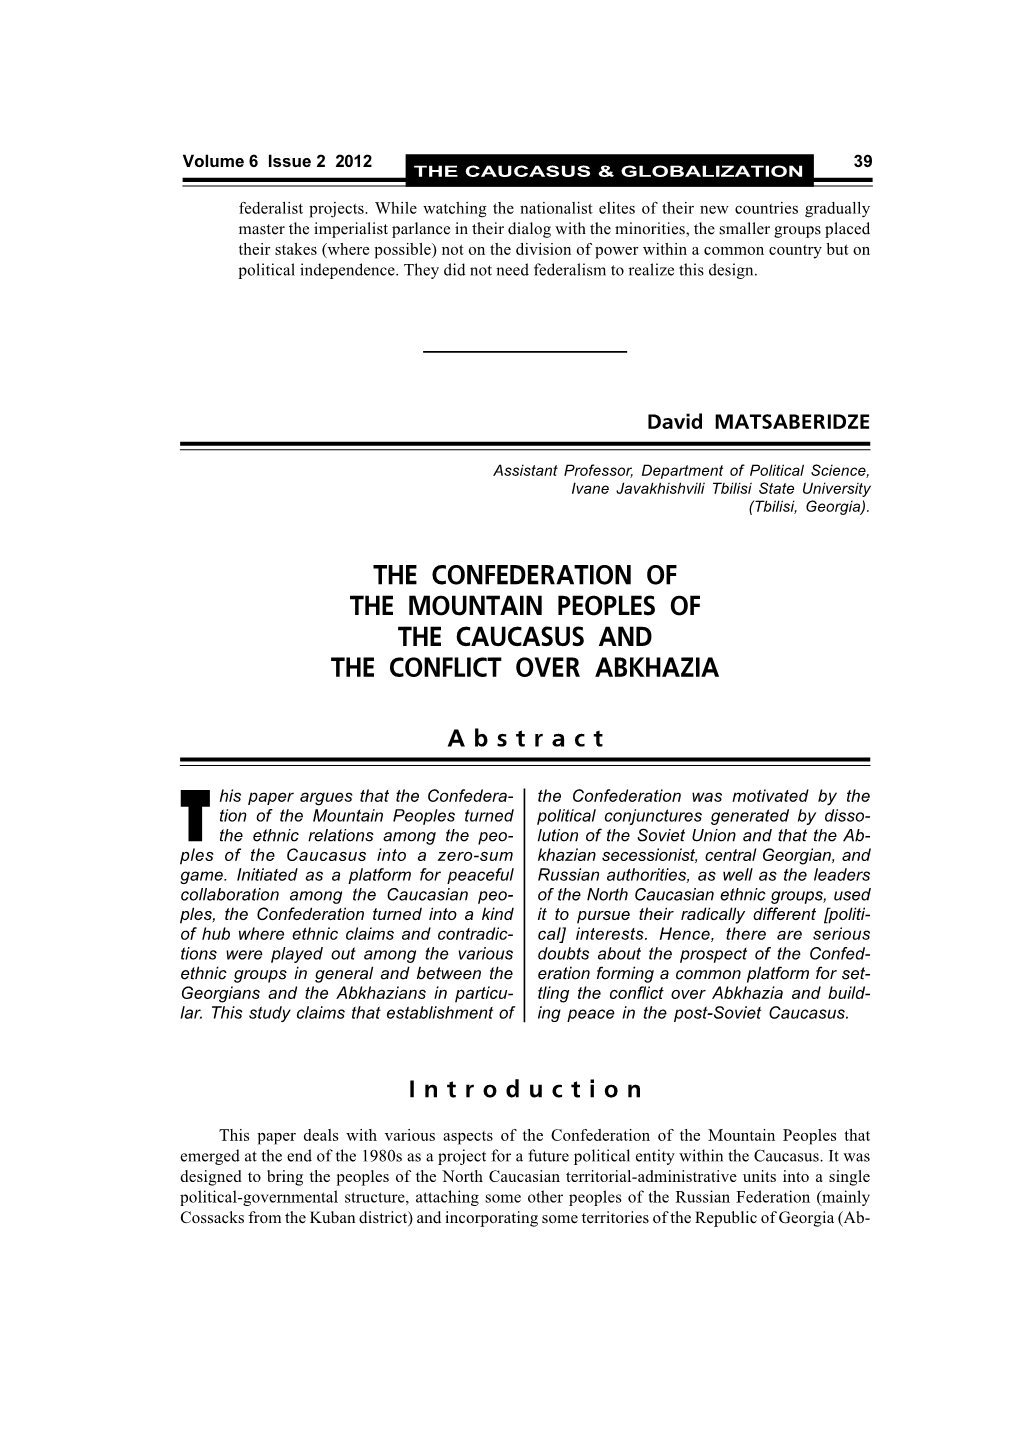 The Confederation of the Mountain Peoples of the Caucasus and the Conflict Over Abkhazia